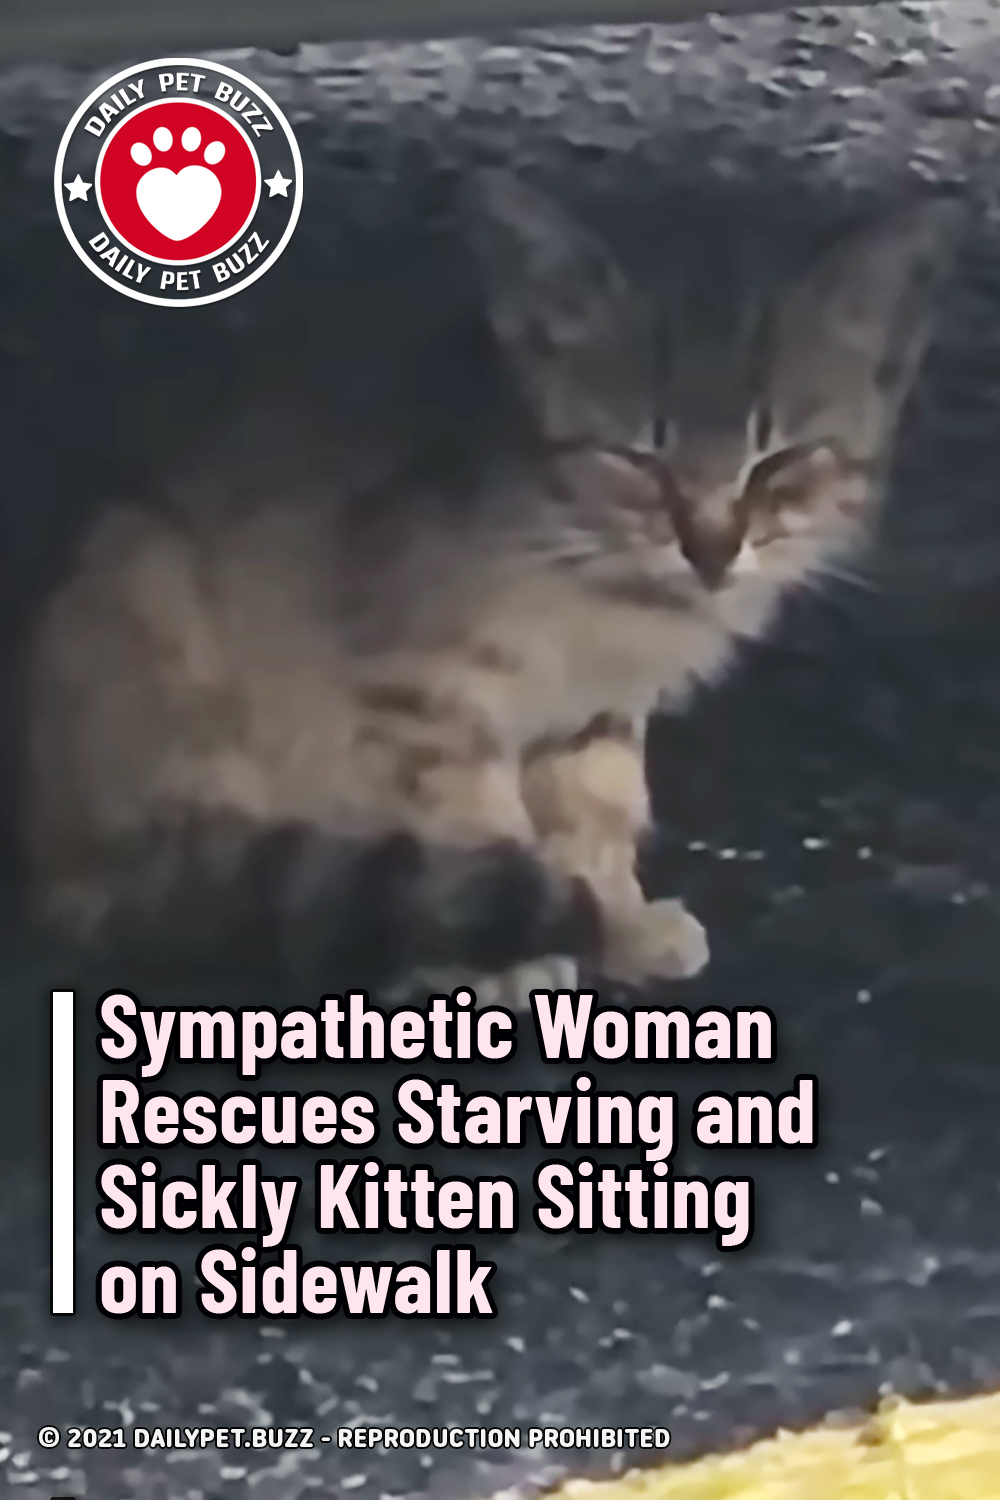 Sympathetic Woman Rescues Starving and Sickly Kitten Sitting on Sidewalk